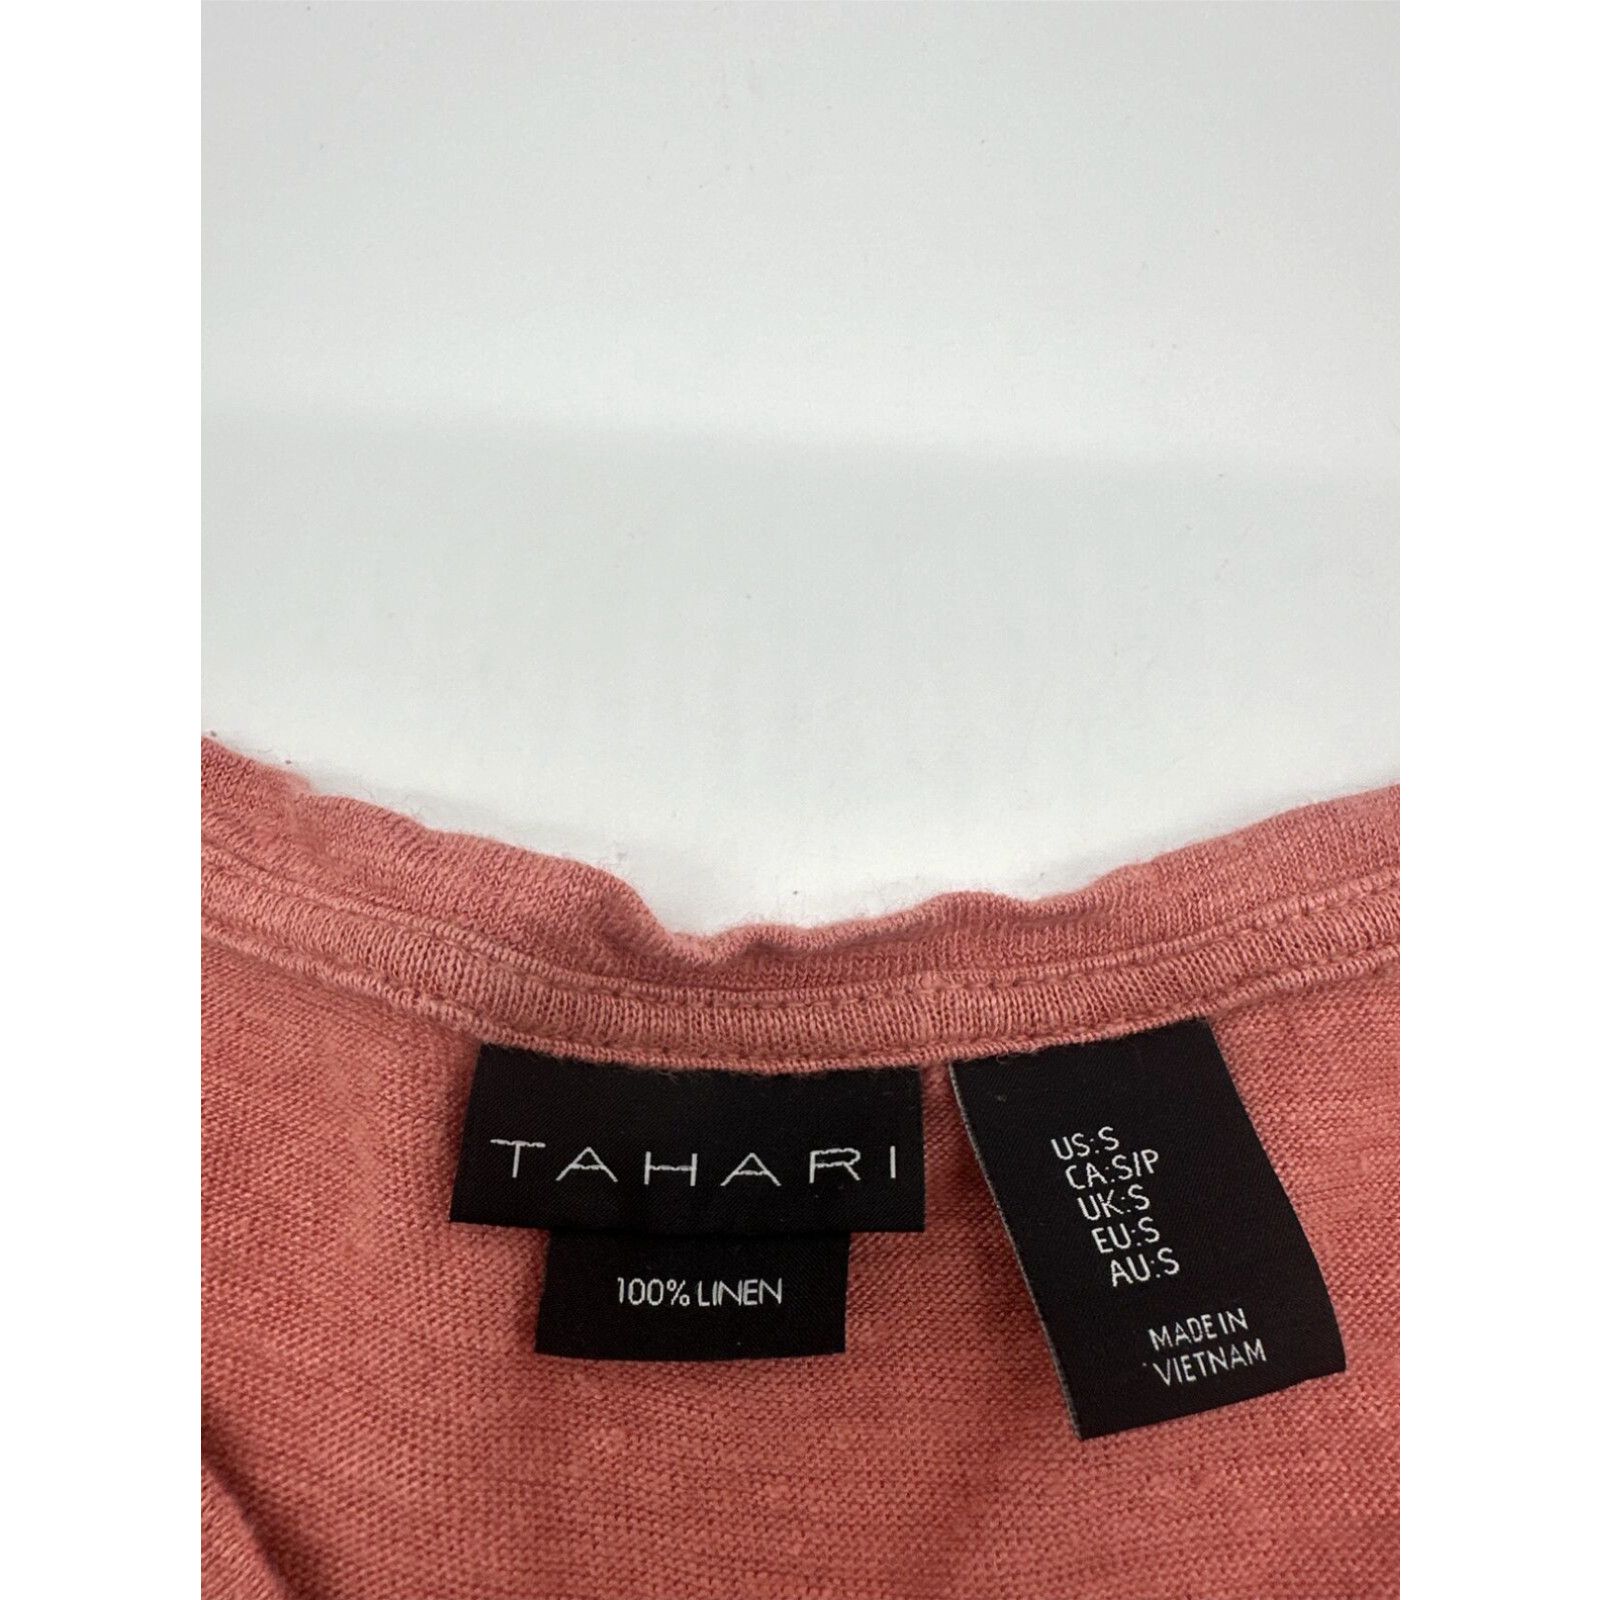 Vintage Tahari Blouse Women Small Red 100% Linen …#2118 Size S / US 4 / IT 40 - 2 Preview